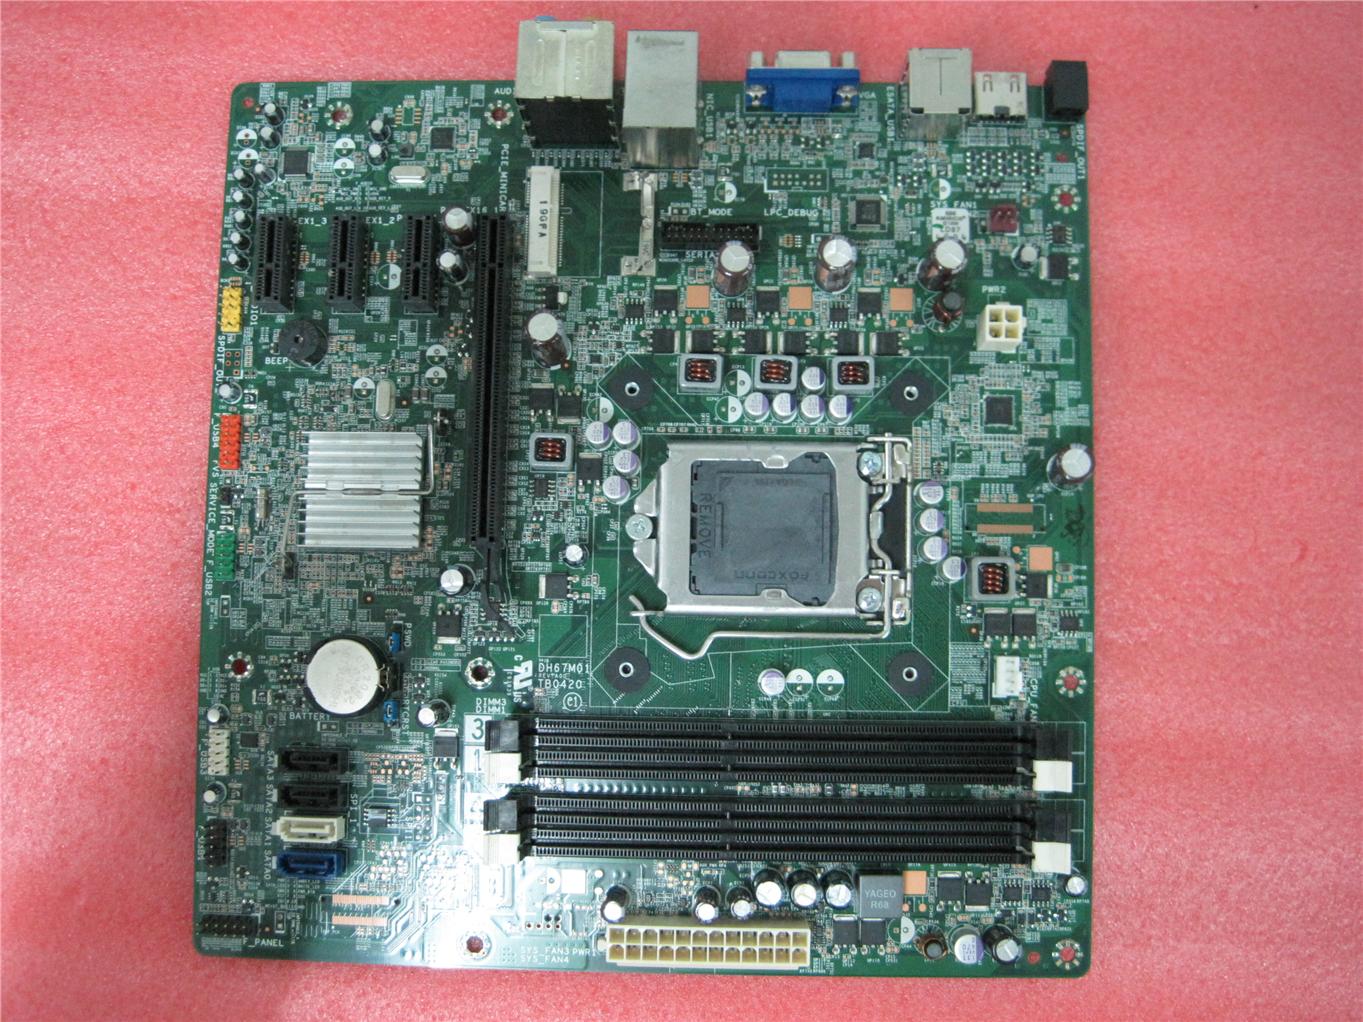 Dell Motherboard E93839 Specs - Dell Photos and Images 2018